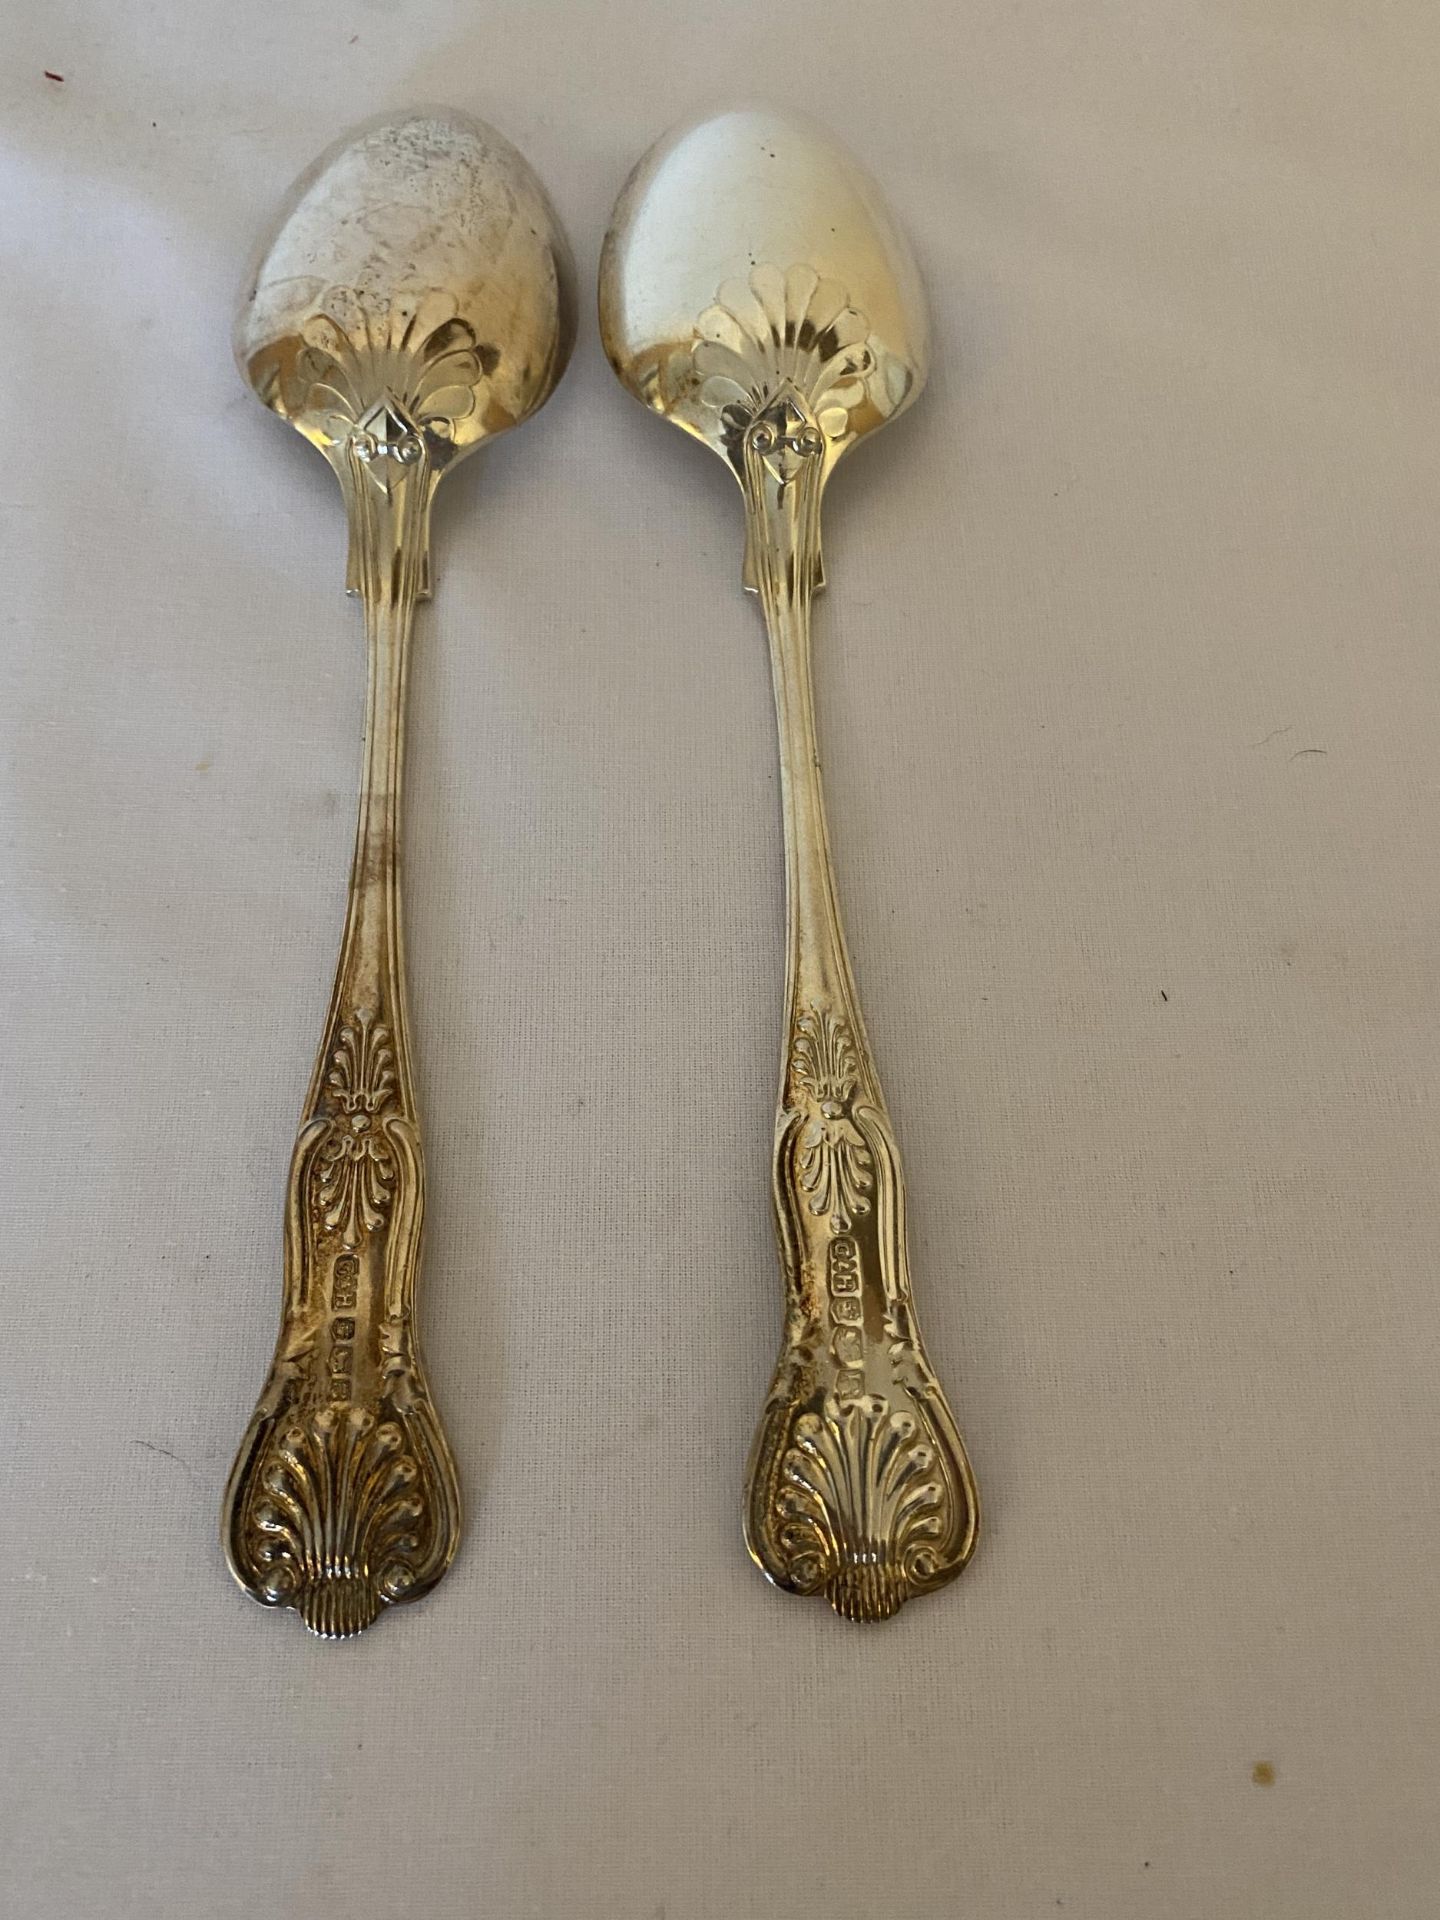 A PAIR OF ELIZABETH II 1959 HALLMARKED SHEFFIELD SILVER SPOONS, MAKER GEE & HOLMES, GROSS WEIGHT 187 - Image 9 of 15